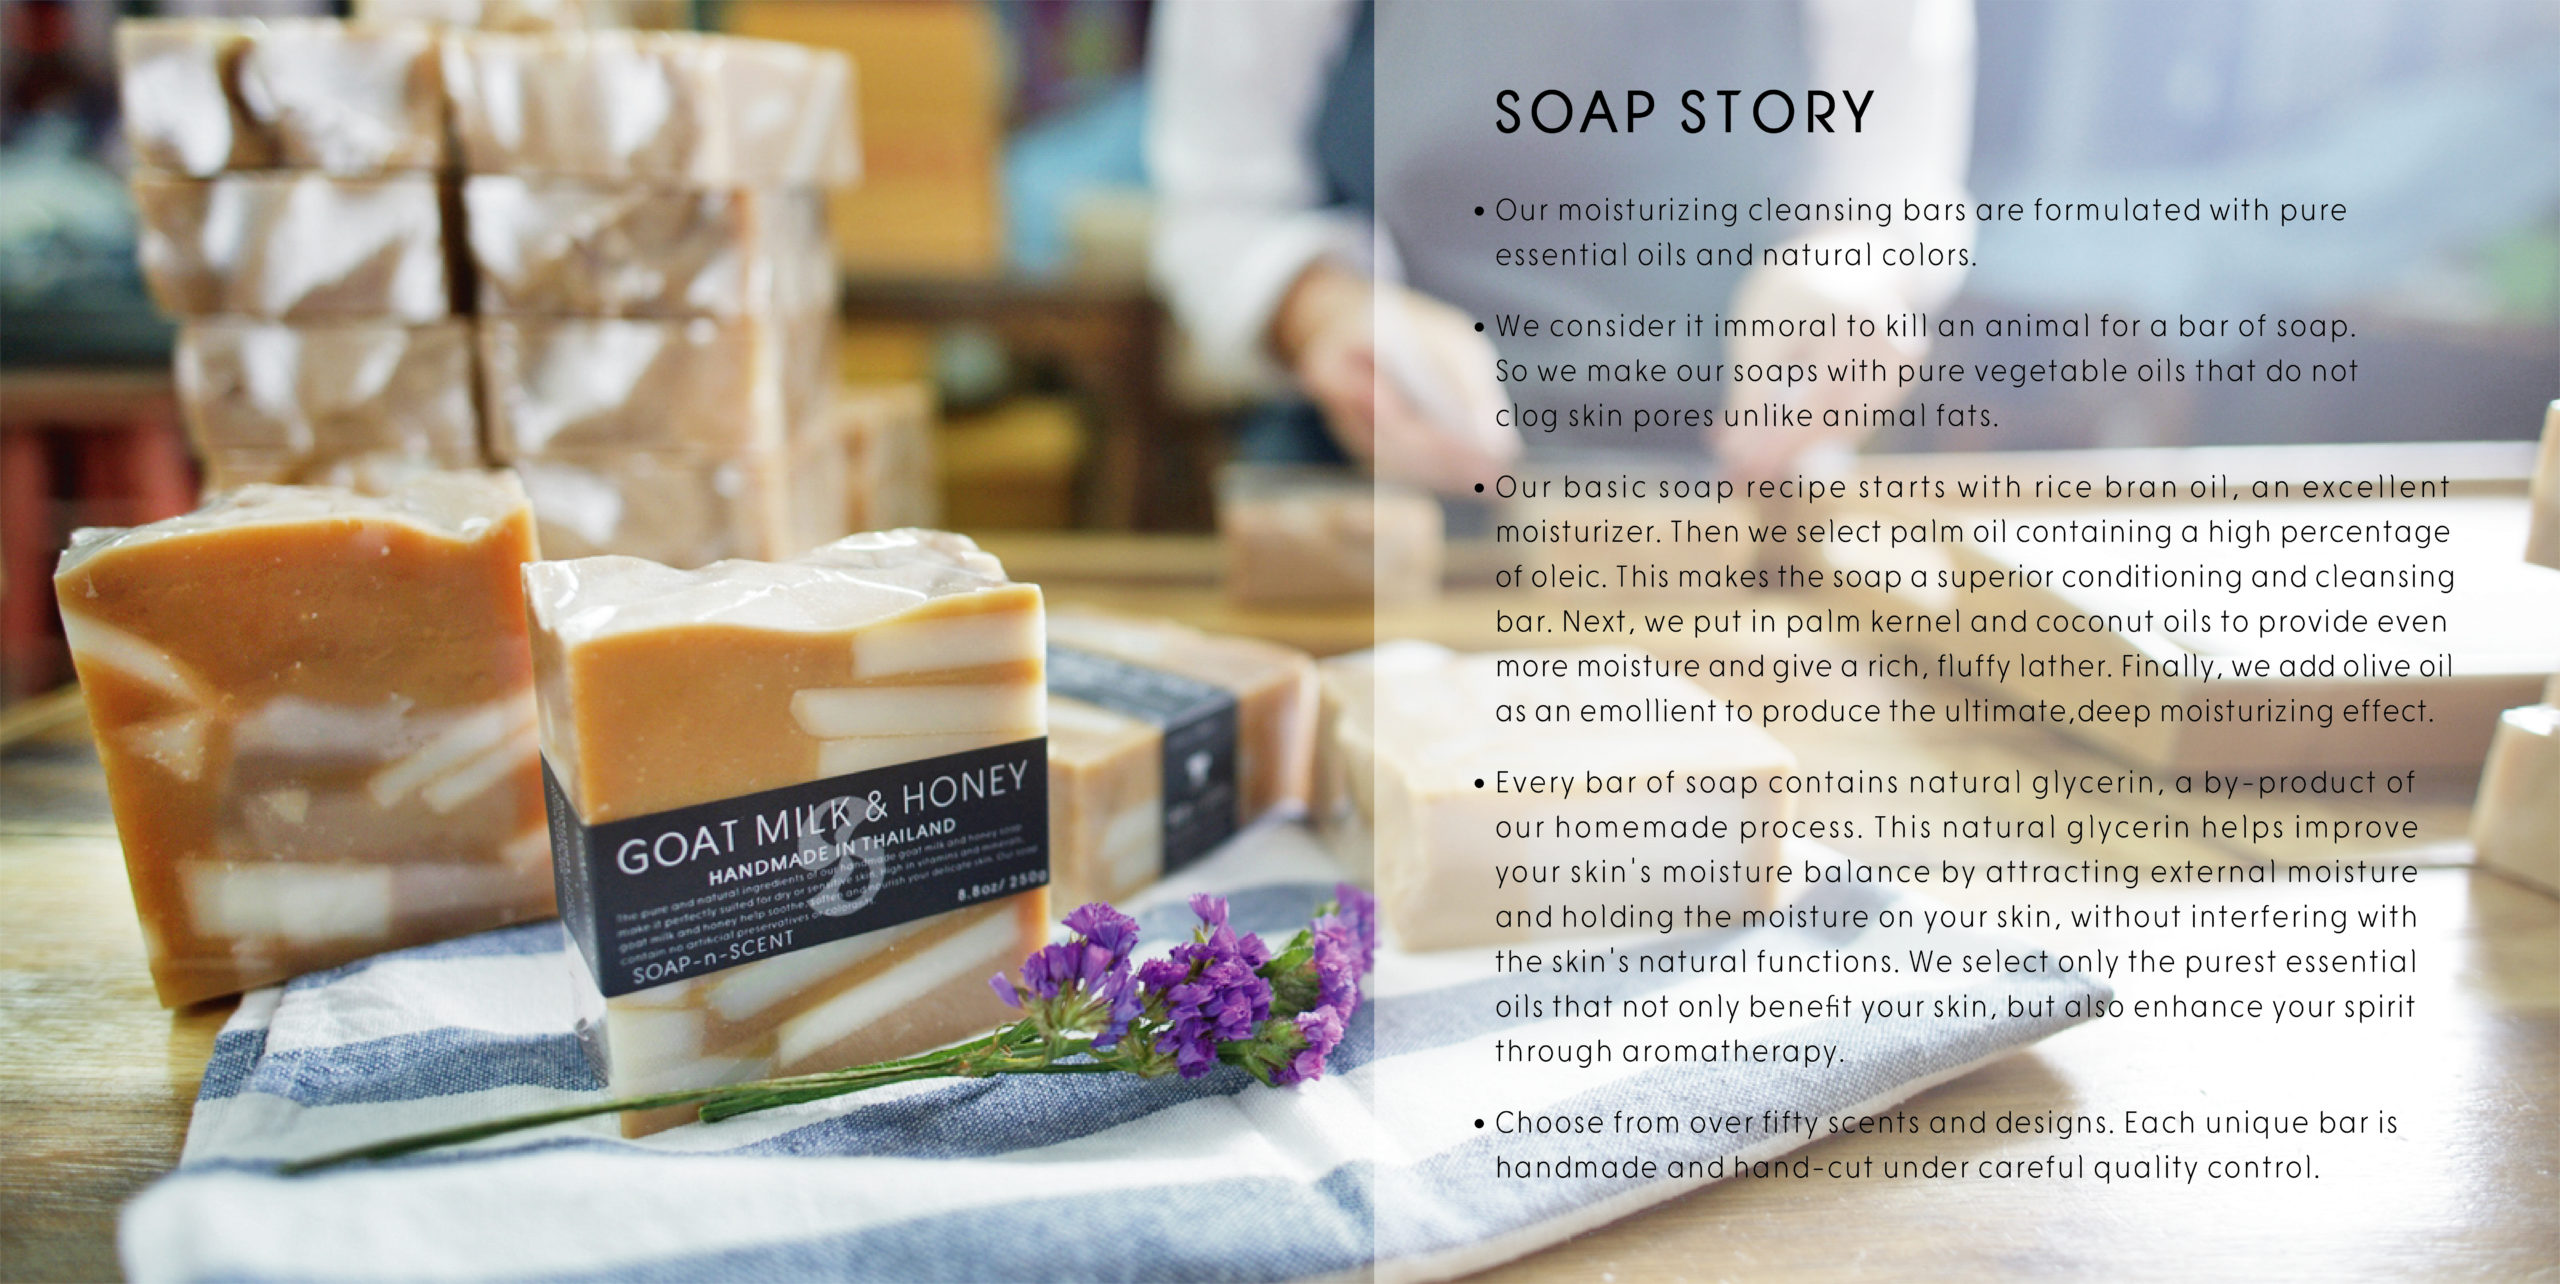 HANDMADE SOAP AND SPA PRODUCTS THAILAND - SOAP-n-SCENT